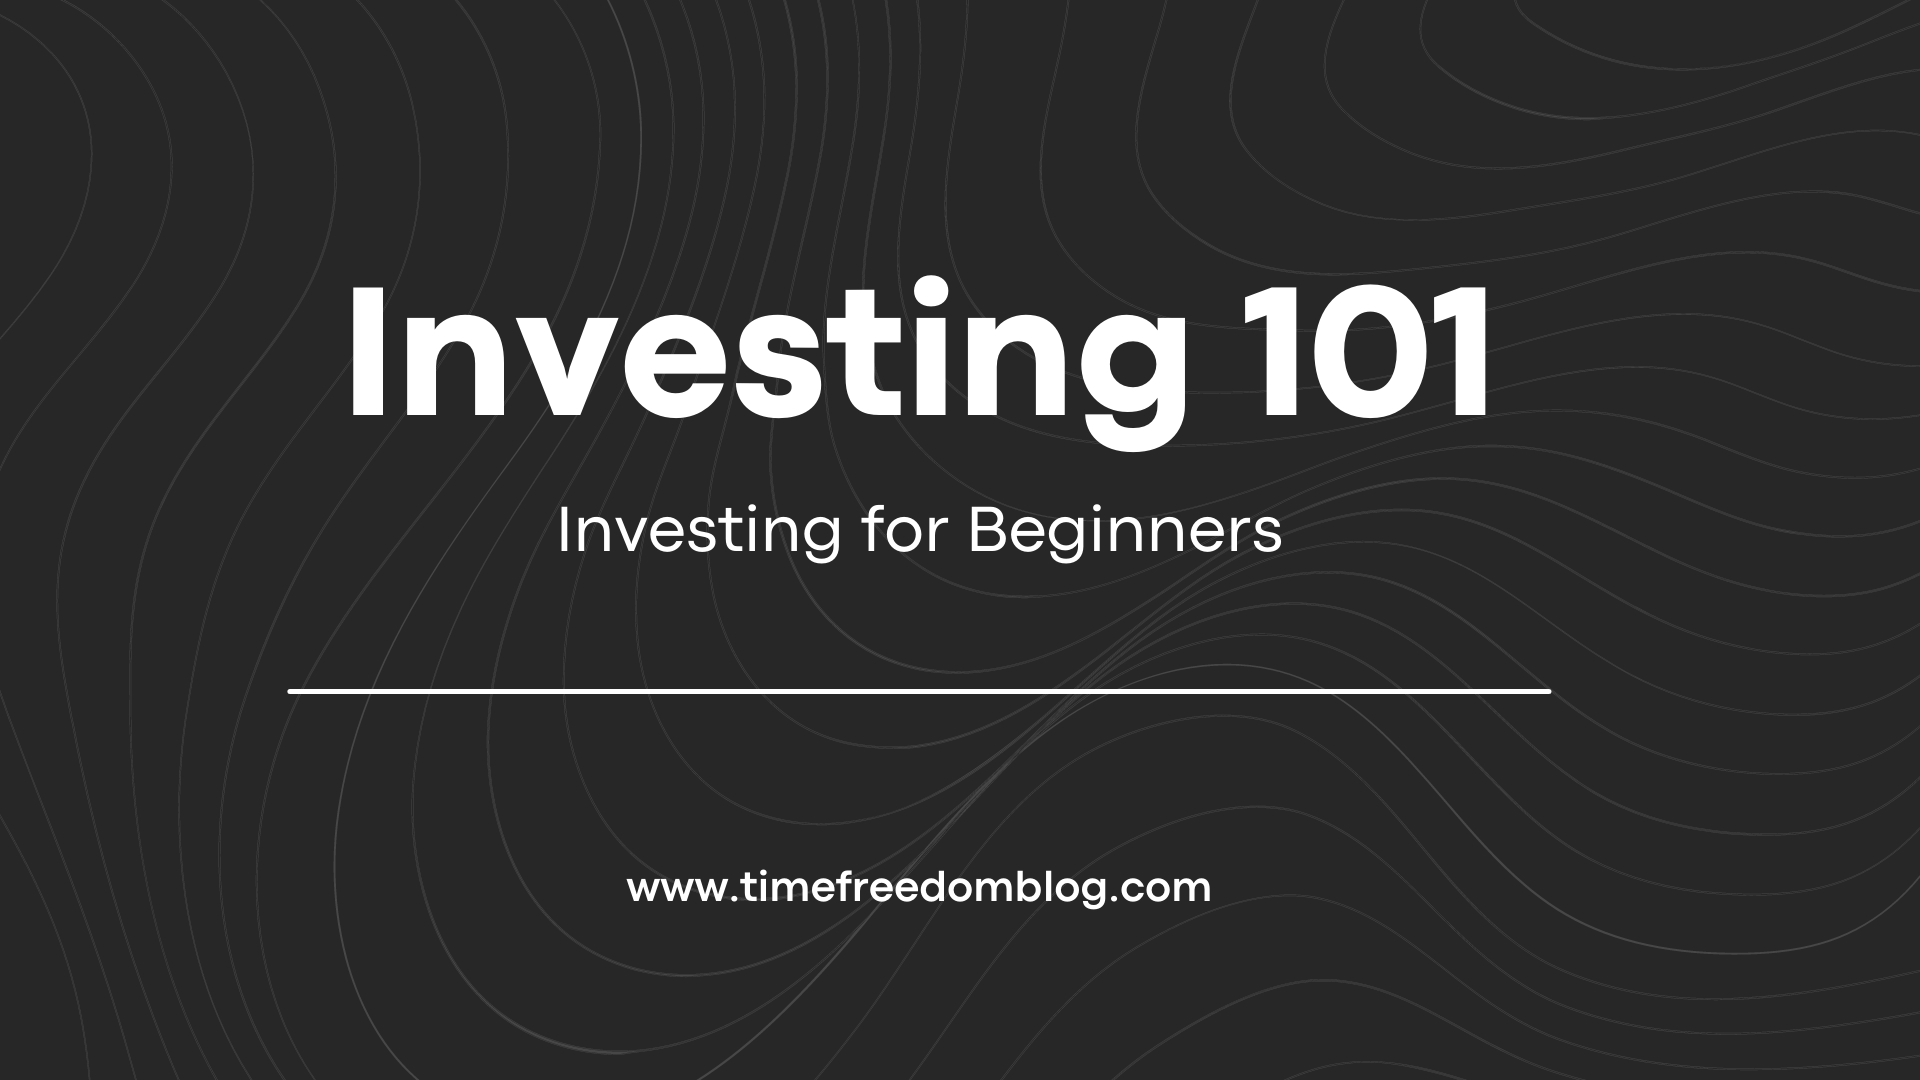 How to Invest for Beginners